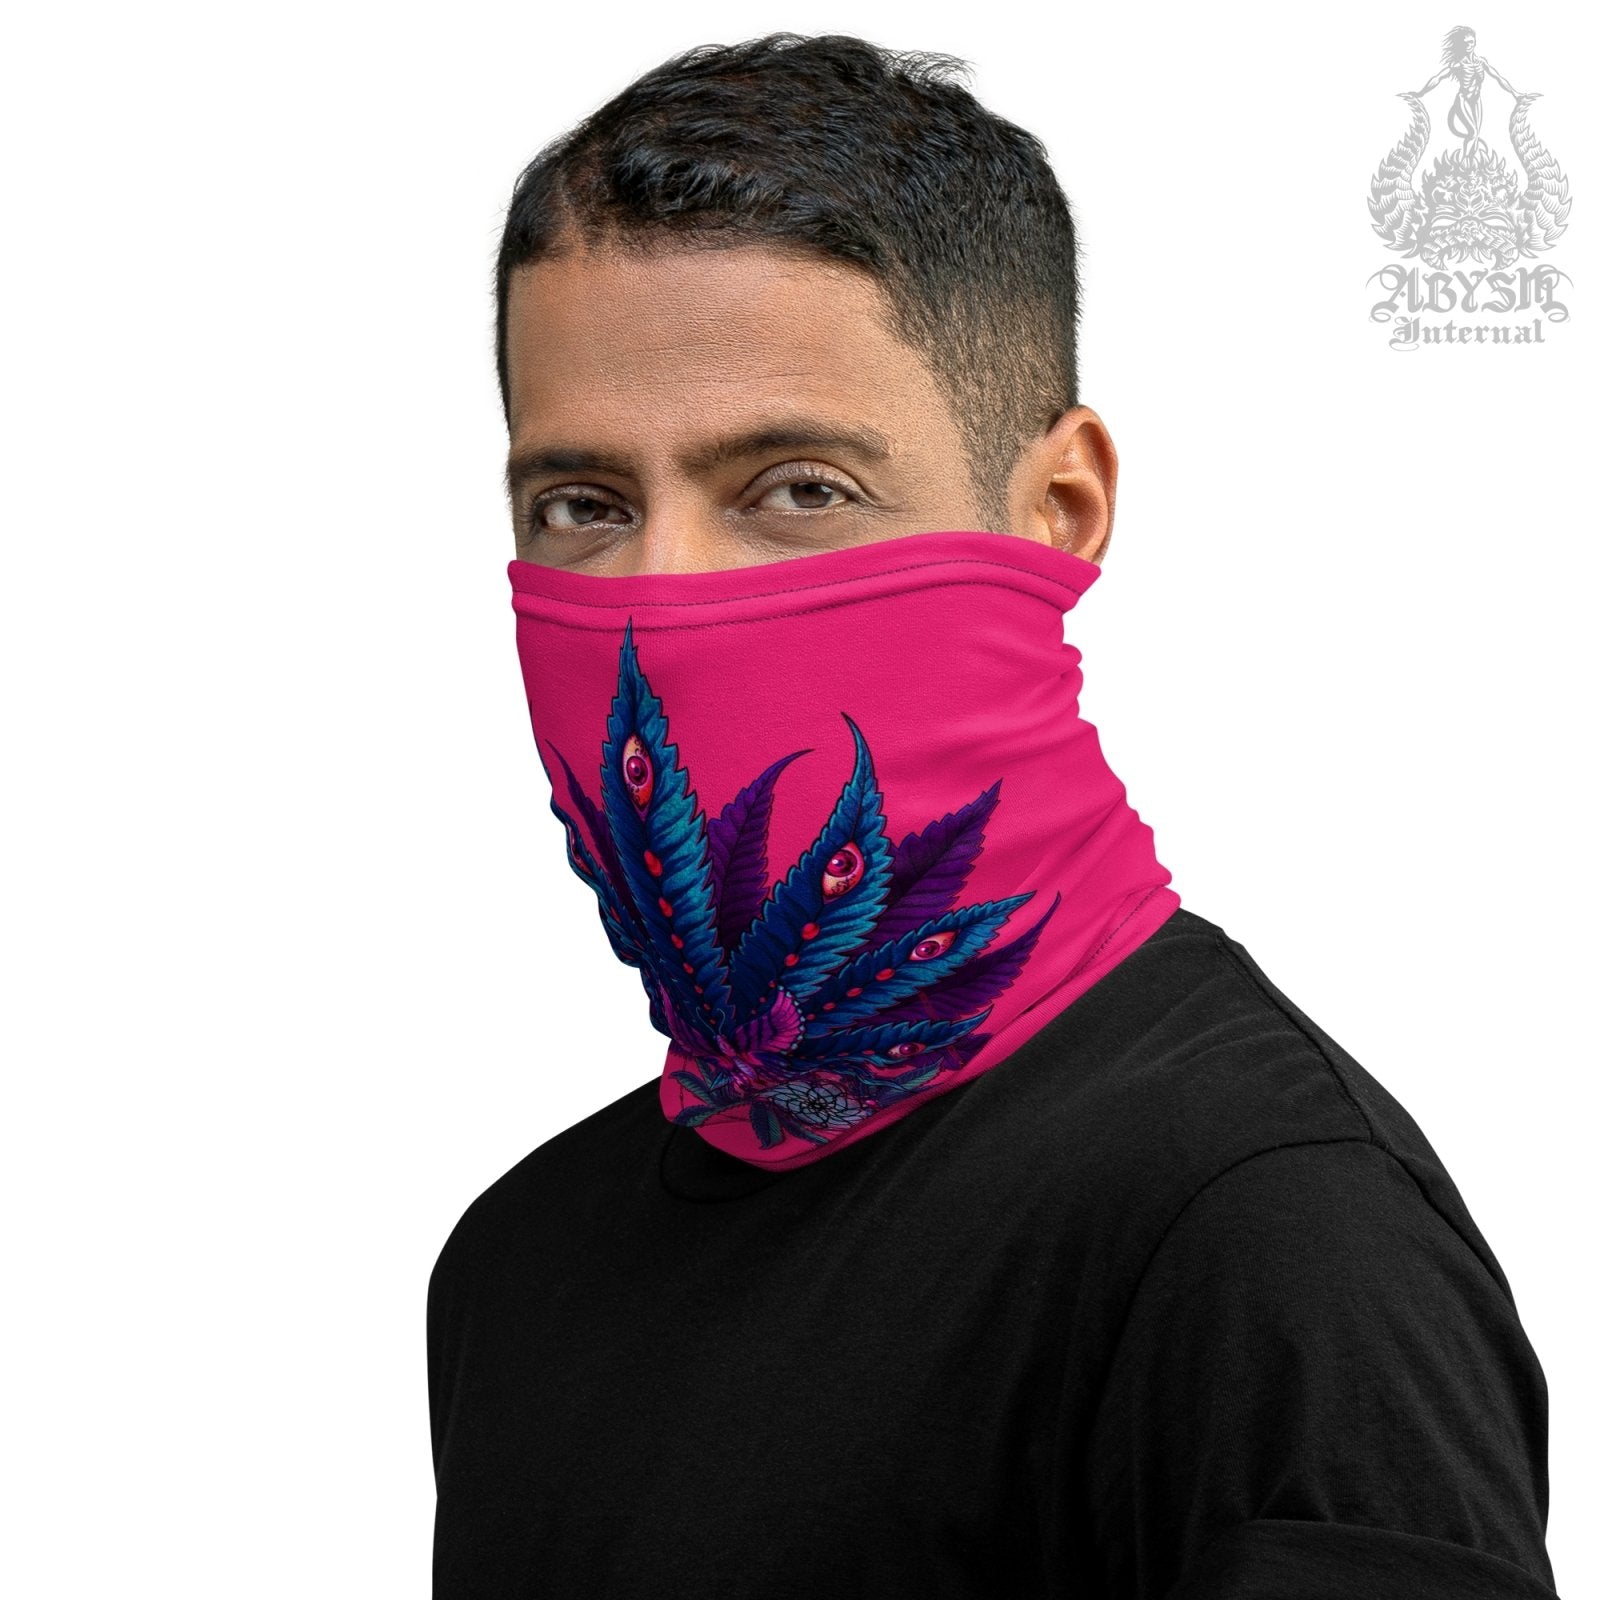 Cannabis Neck Gaiter, Weed Face Mask, Marijuana Head Covering, Neon Retrowave, Festival Outfit, 420 Gift - I Pink - Abysm Internal